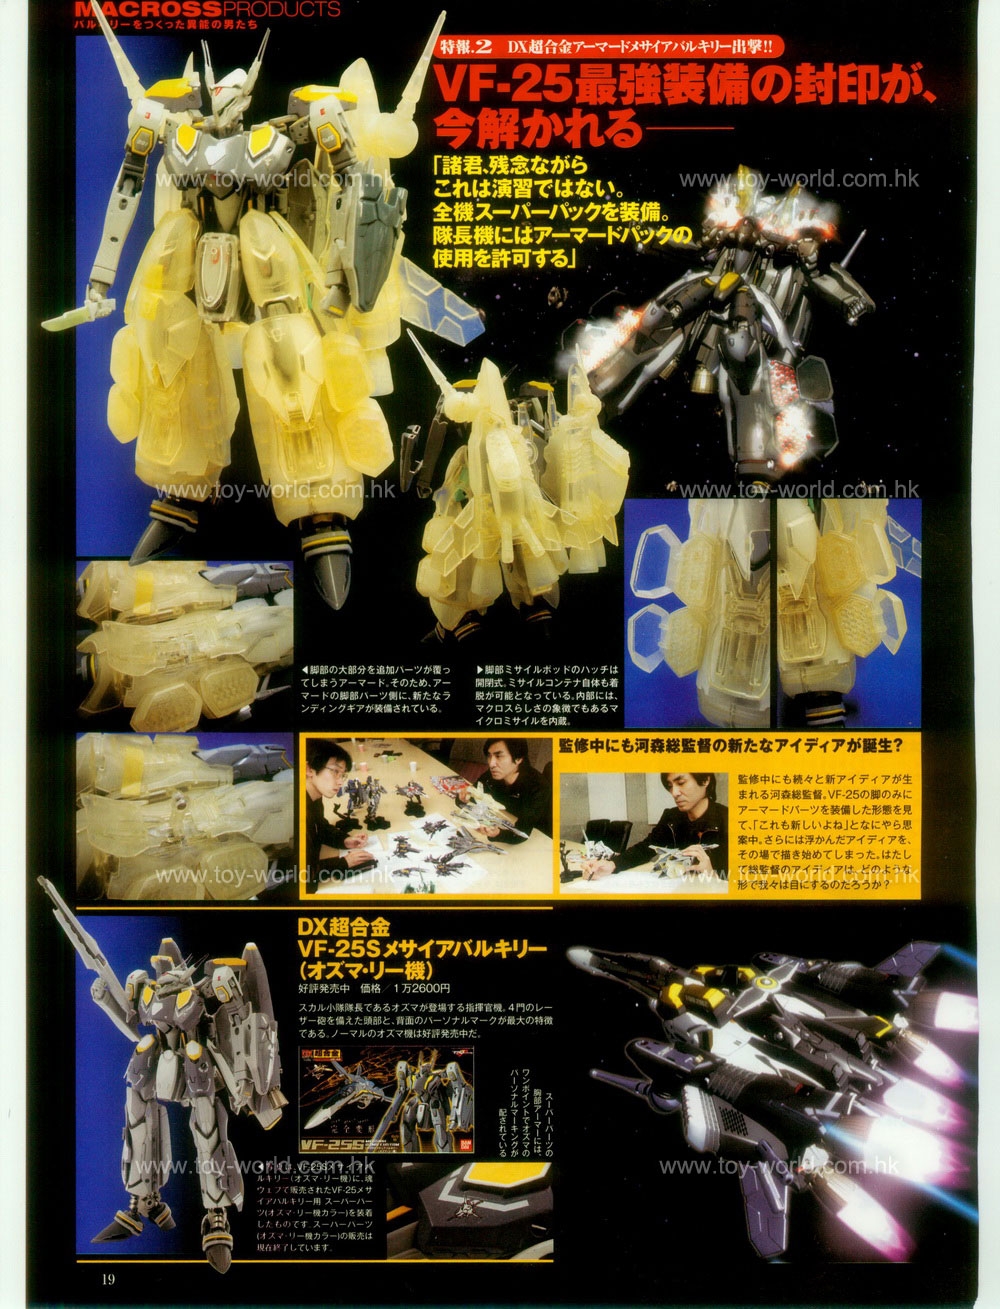 Figure OH No.134 - Special Feature: MACROSS Products 17